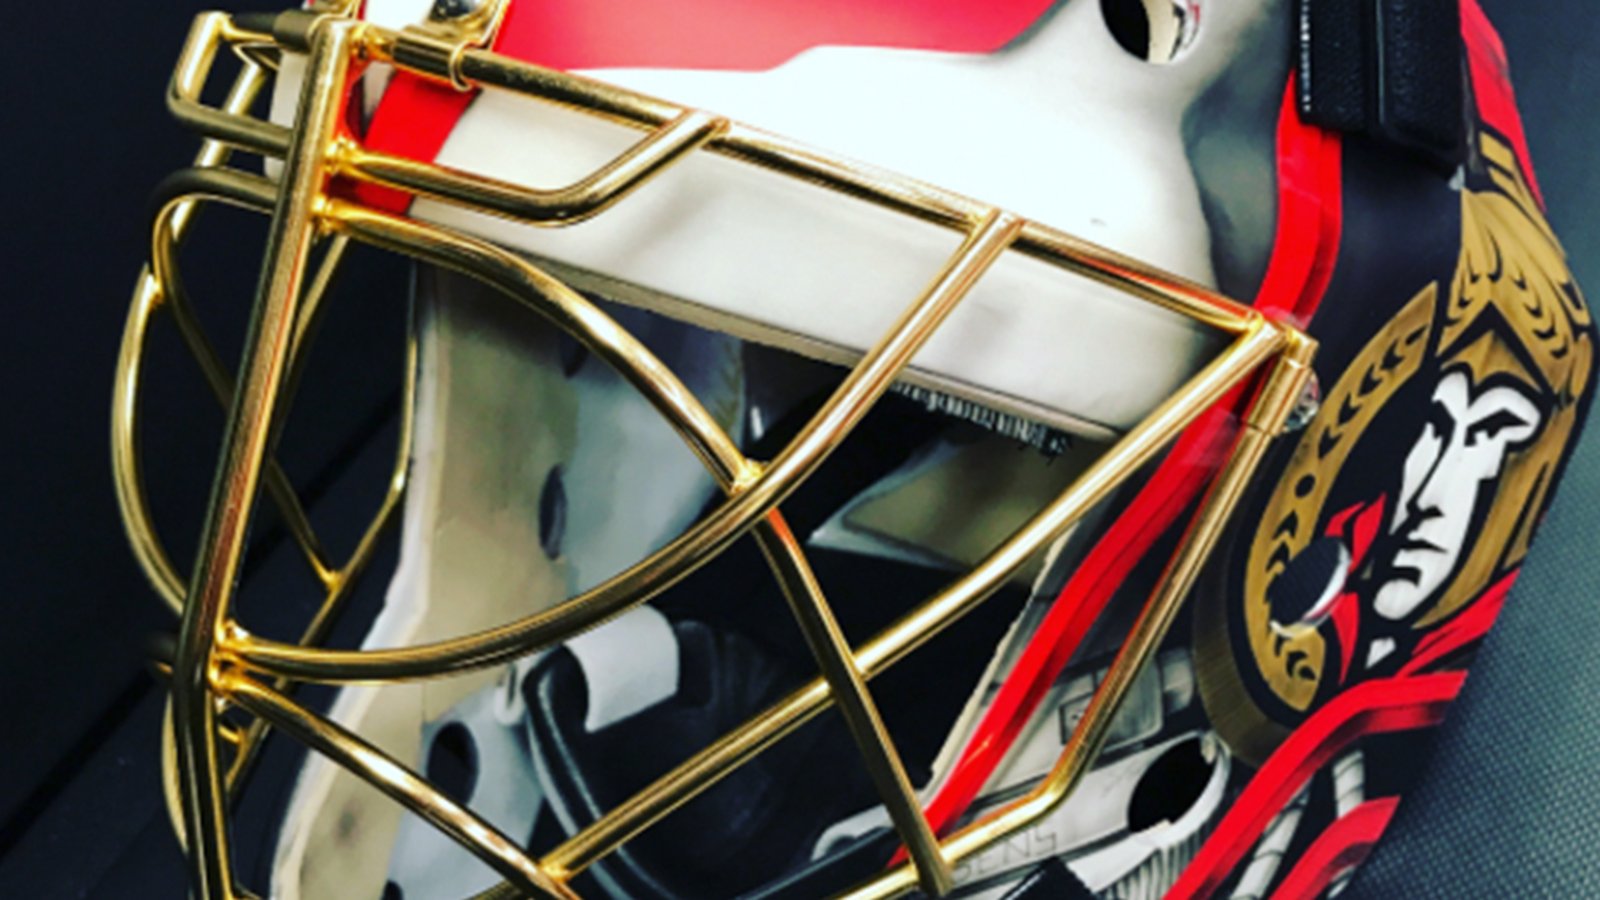 Must See: Honors wife Nicholle with his incredible new mask